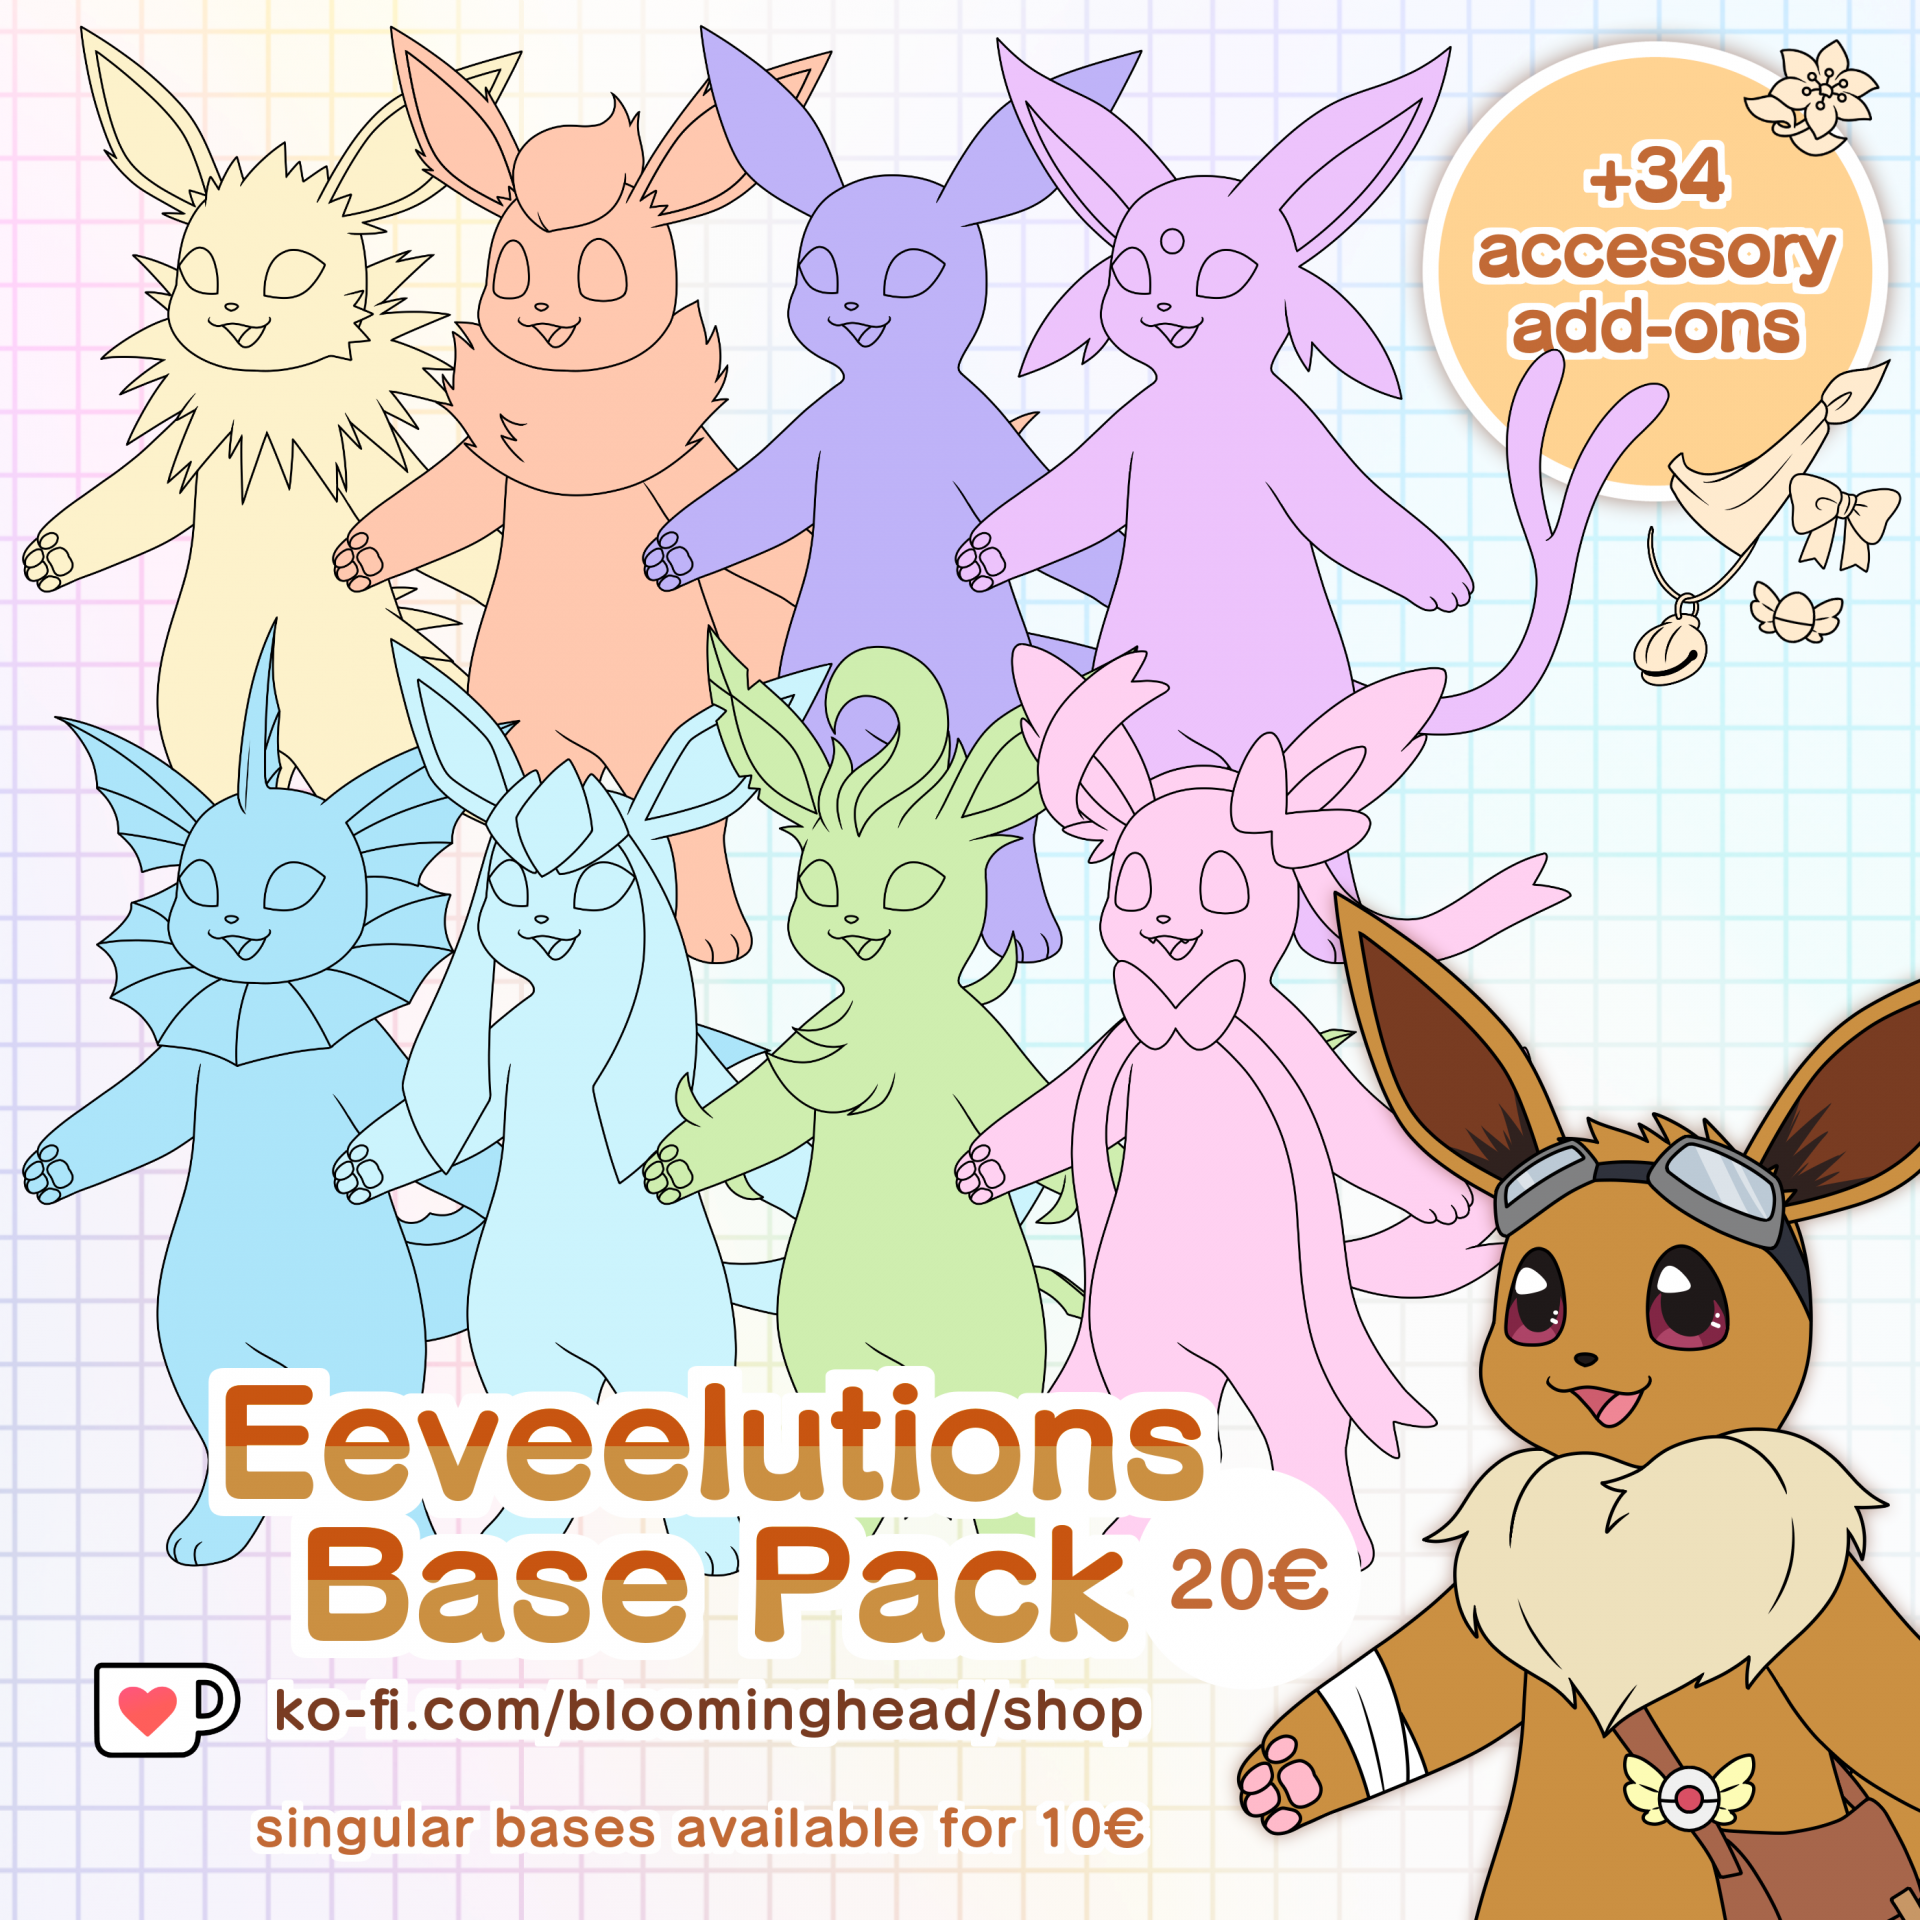 Eeveelution Base Bundle - LYNX3000's Ko-fi Shop - Ko-fi ❤️ Where creators  get support from fans through donations, memberships, shop sales and more!  The original 'Buy Me a Coffee' Page.